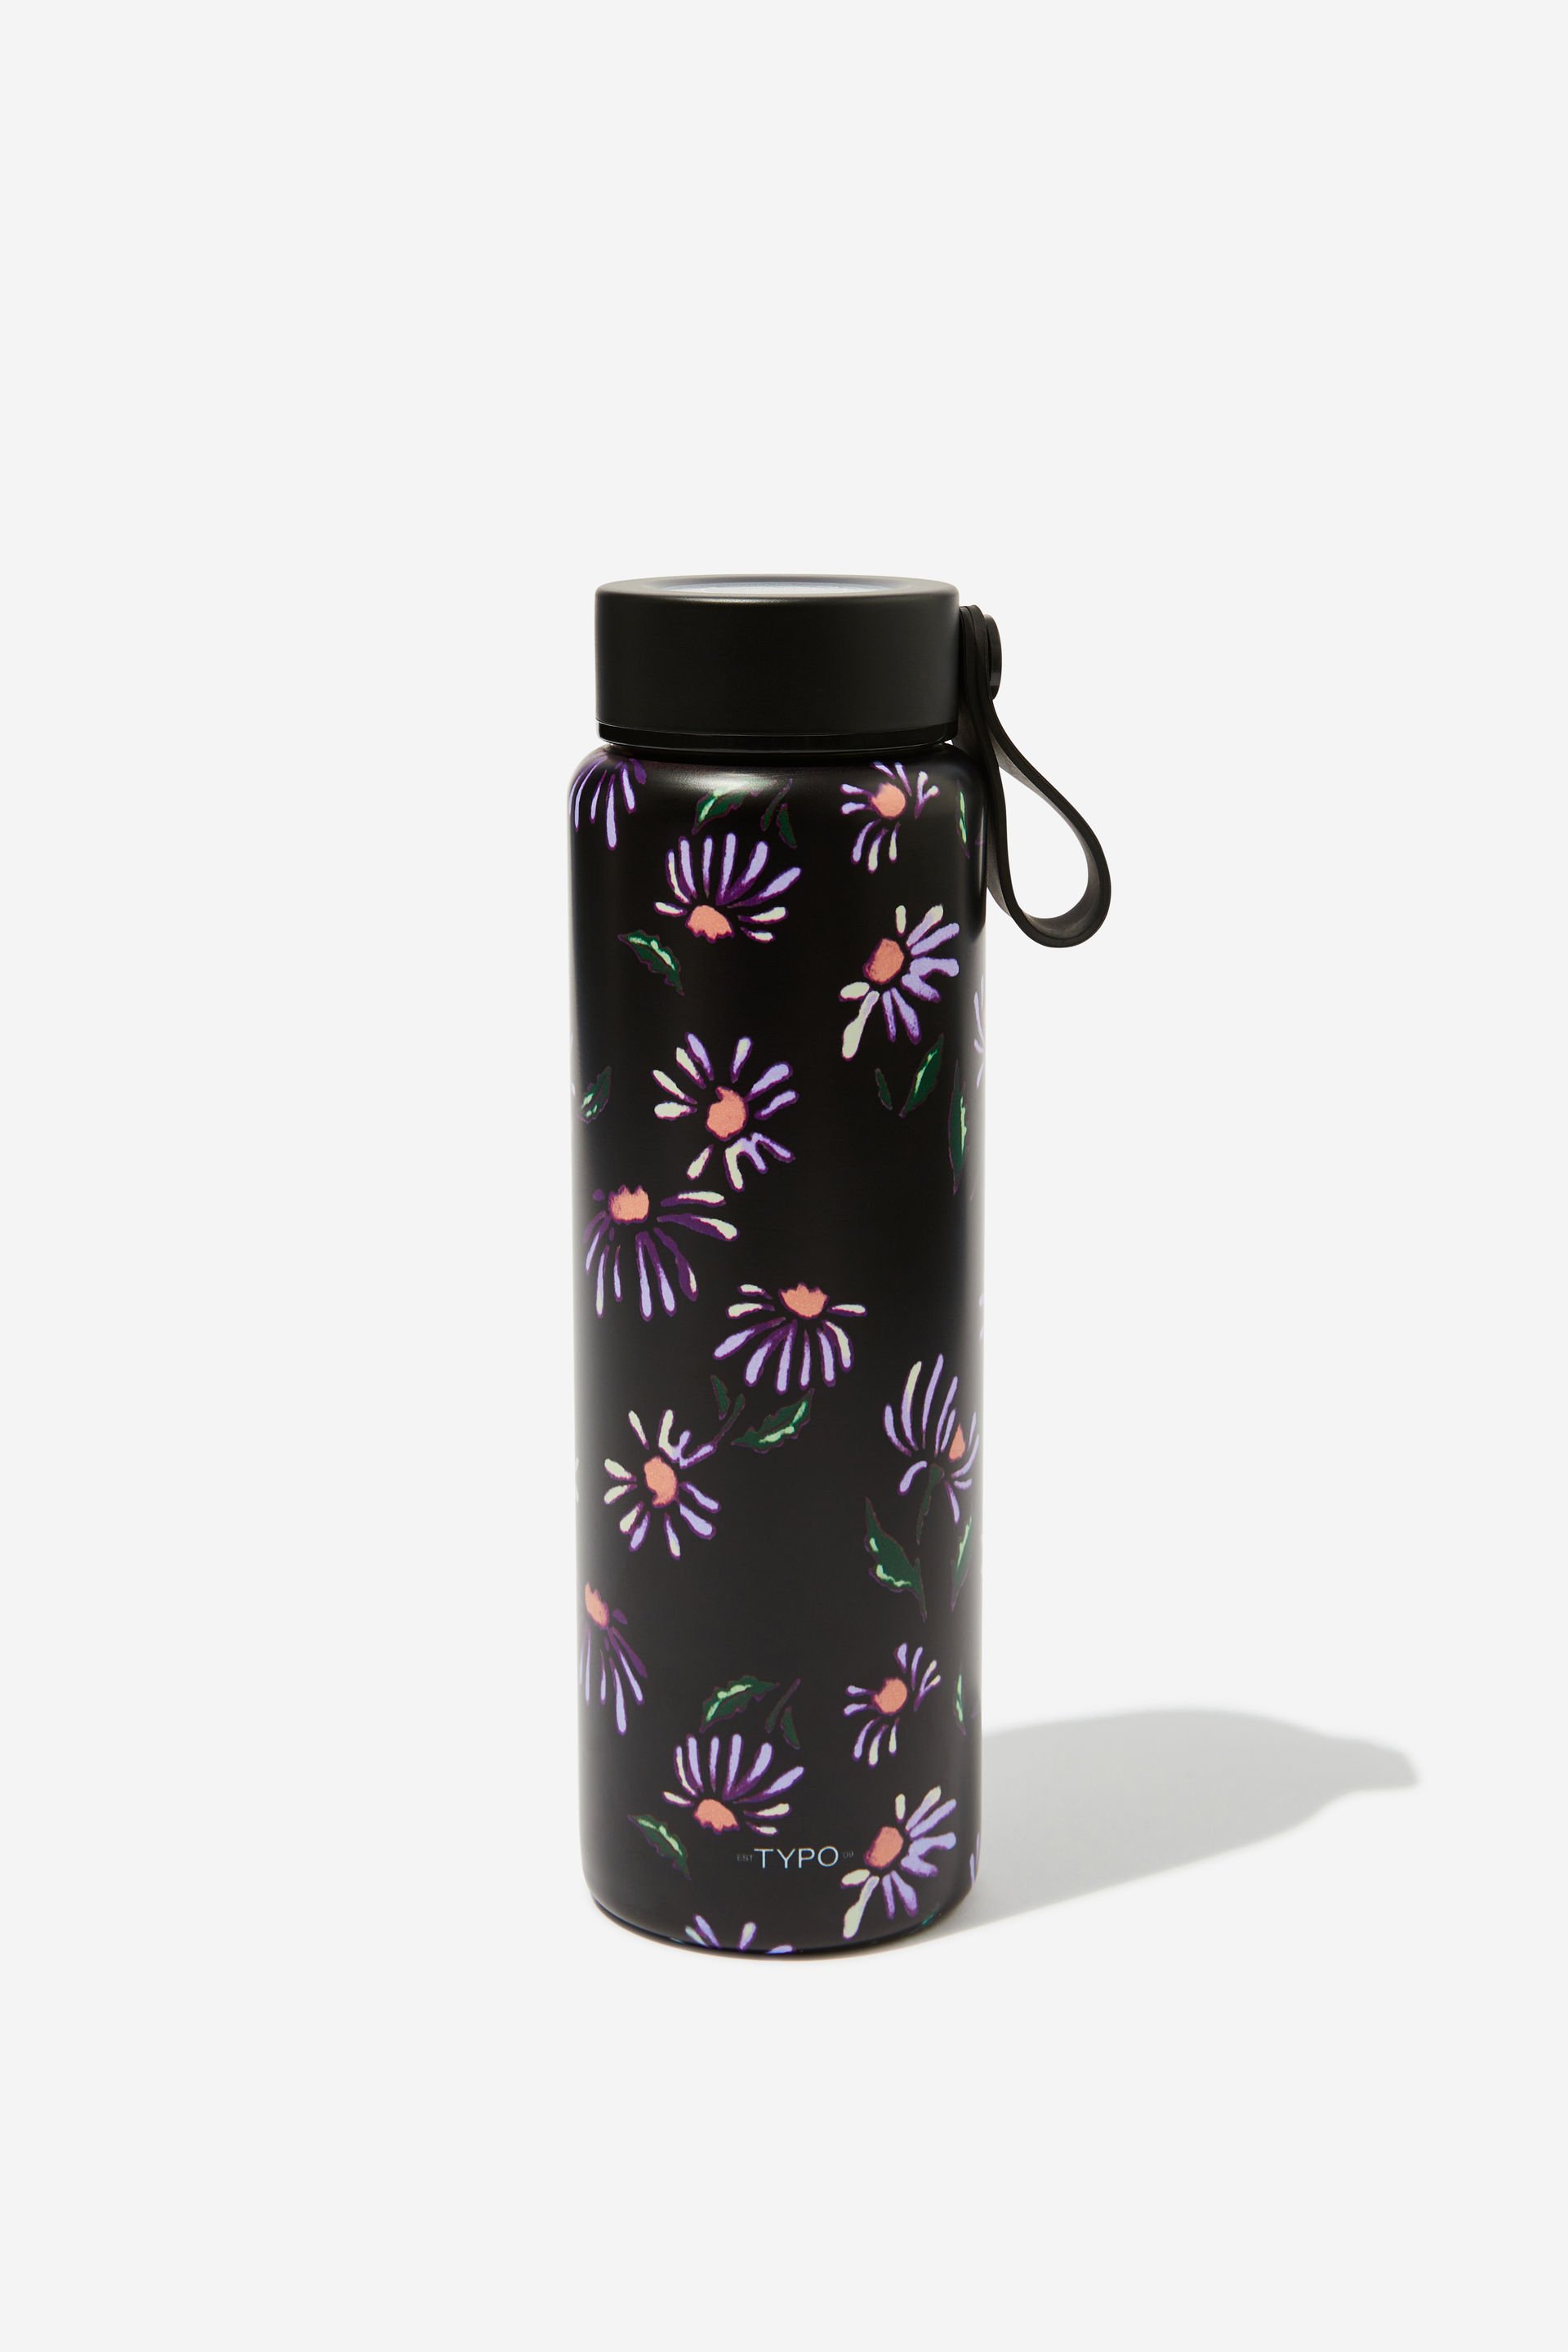 Typo - On The Move 500Ml Drink Bottle 2.0 - Daisy crayon black